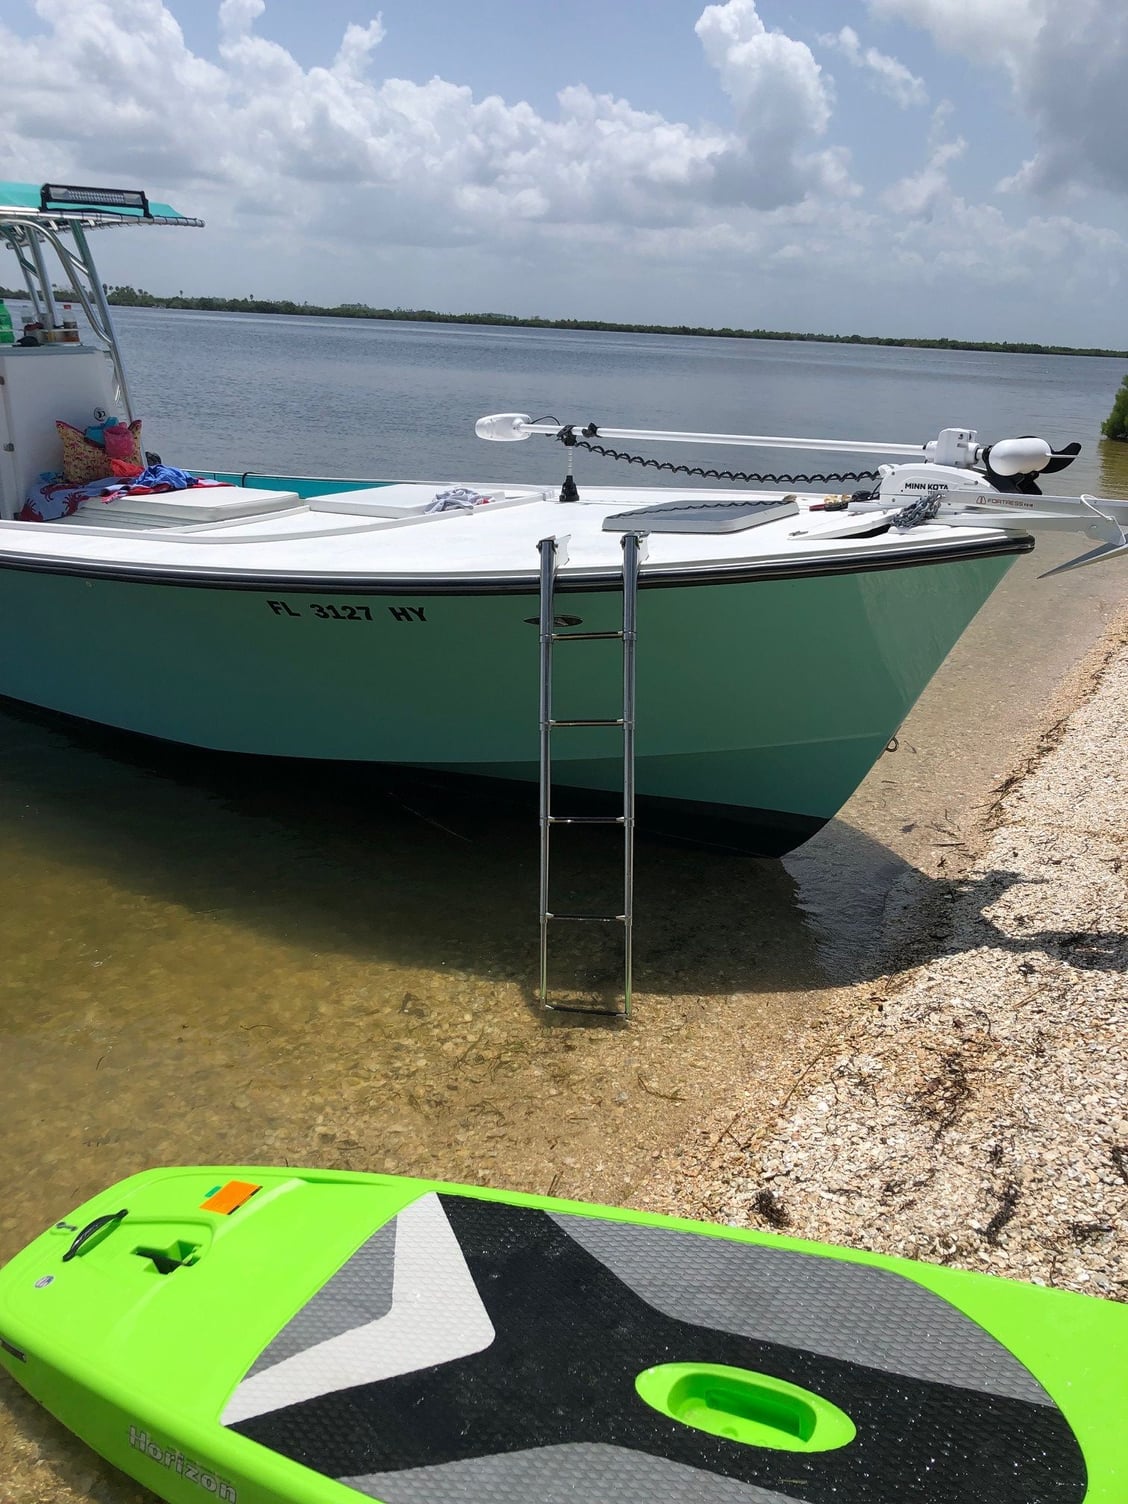 Quick detach ladder for the boat, cool product. - The Hull Truth - Boating  and Fishing Forum